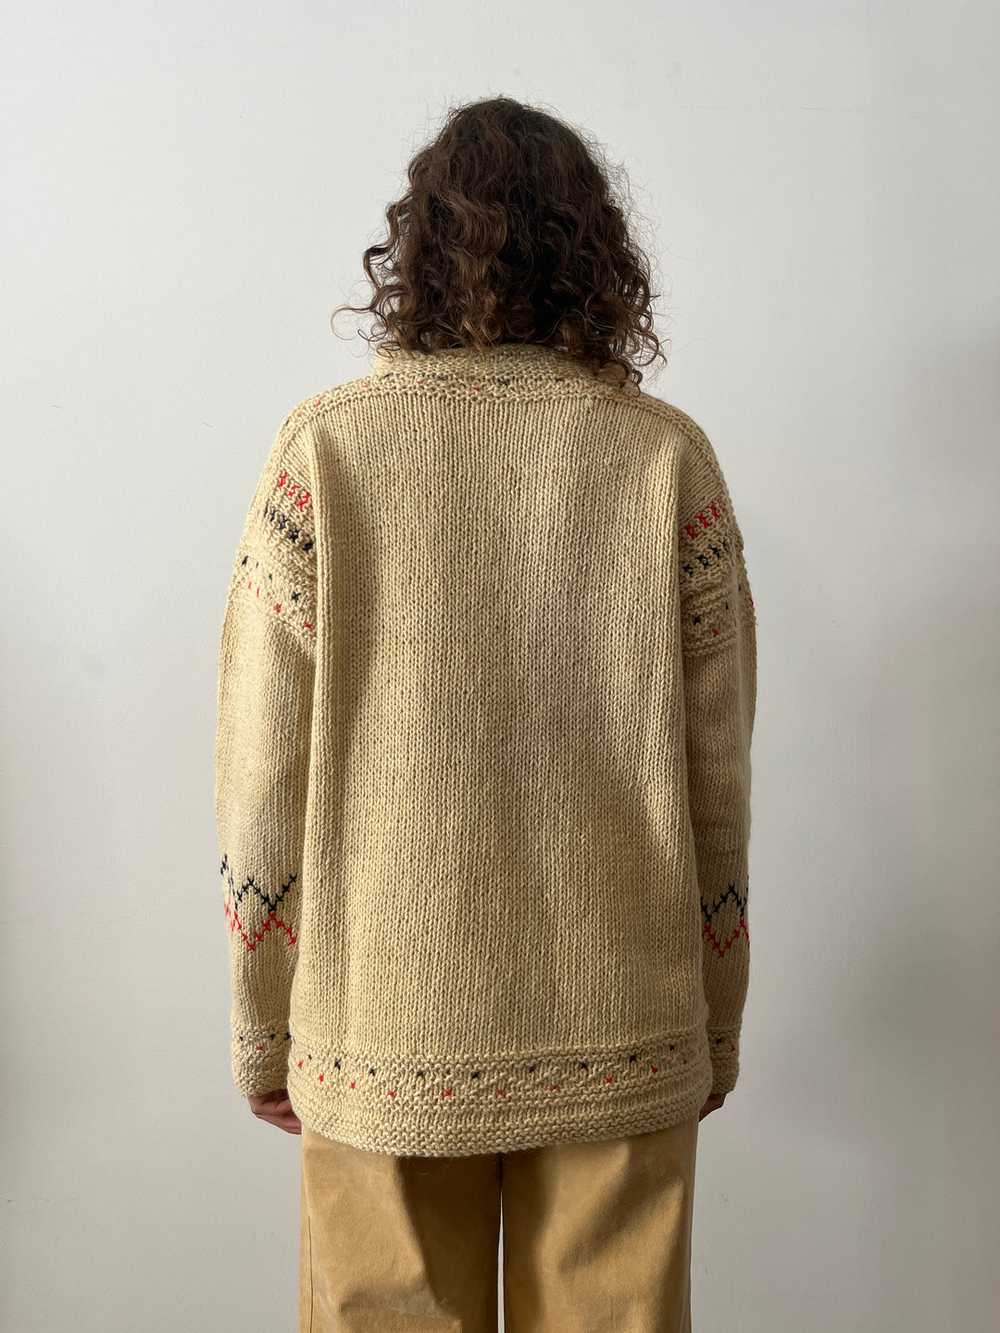 Handknit Rooster Pullover Sweater - image 4